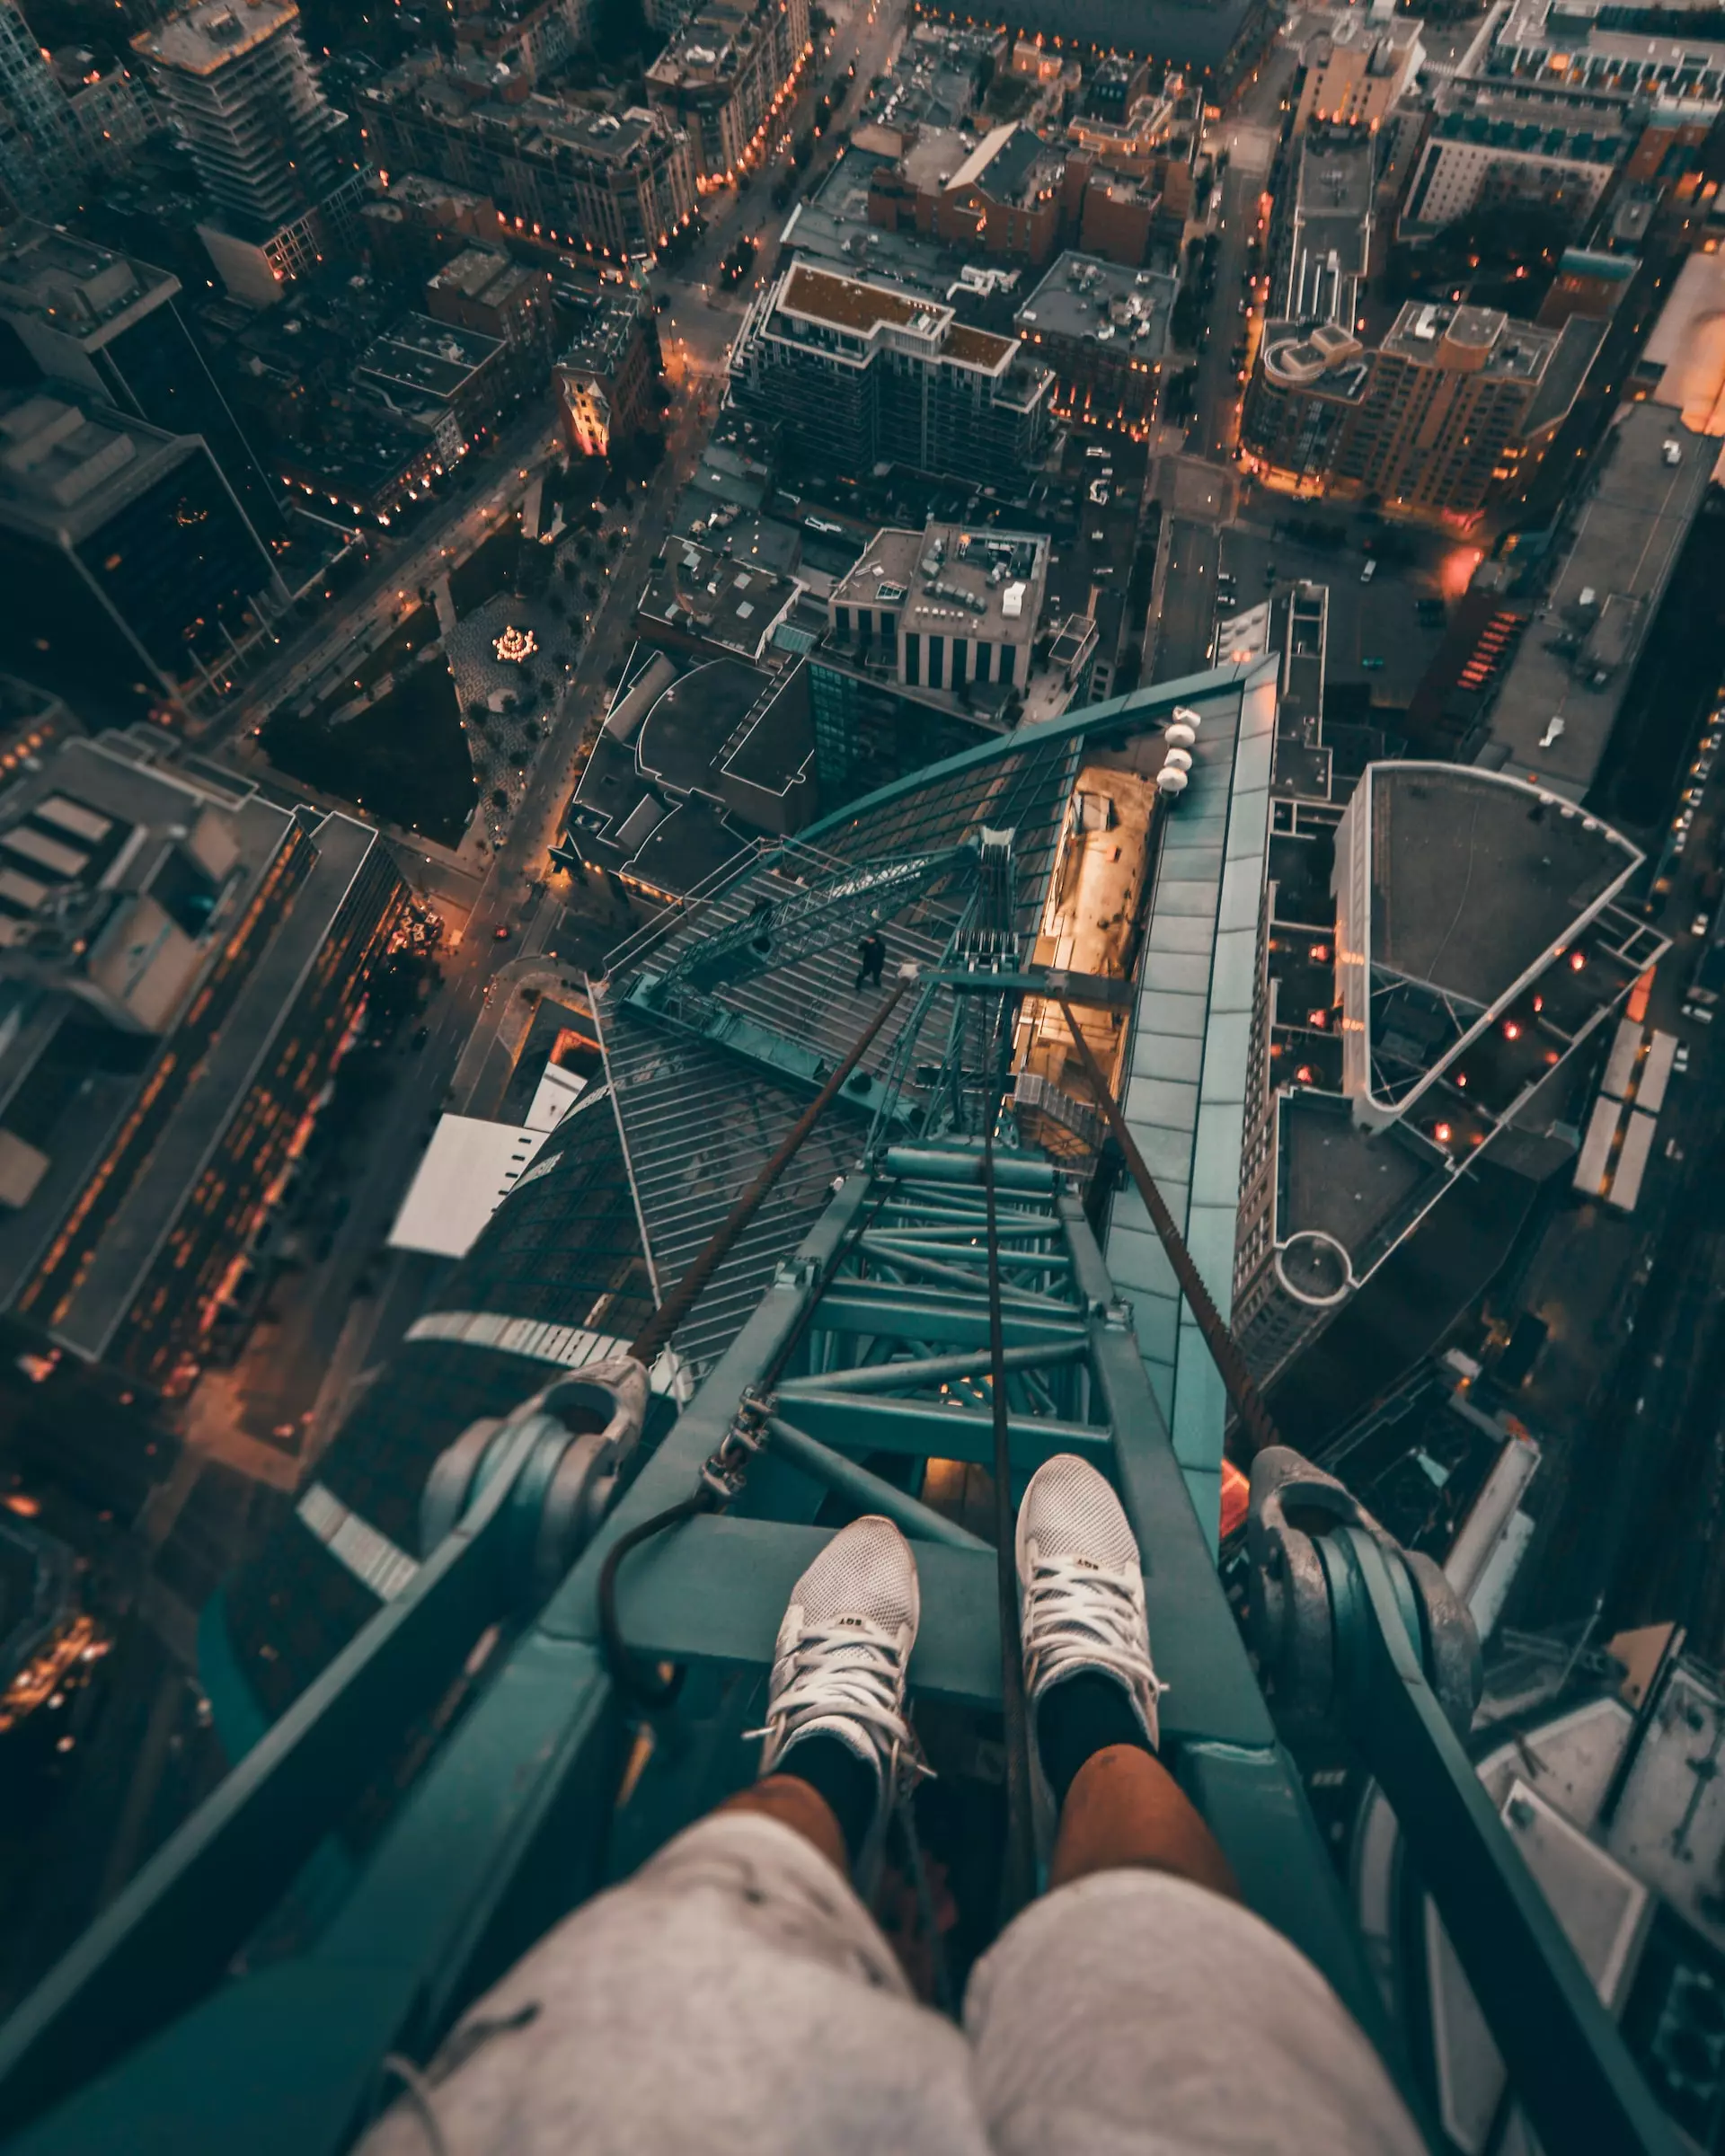 View from perspective of a free climber atop a crane looking down onto a cityscape